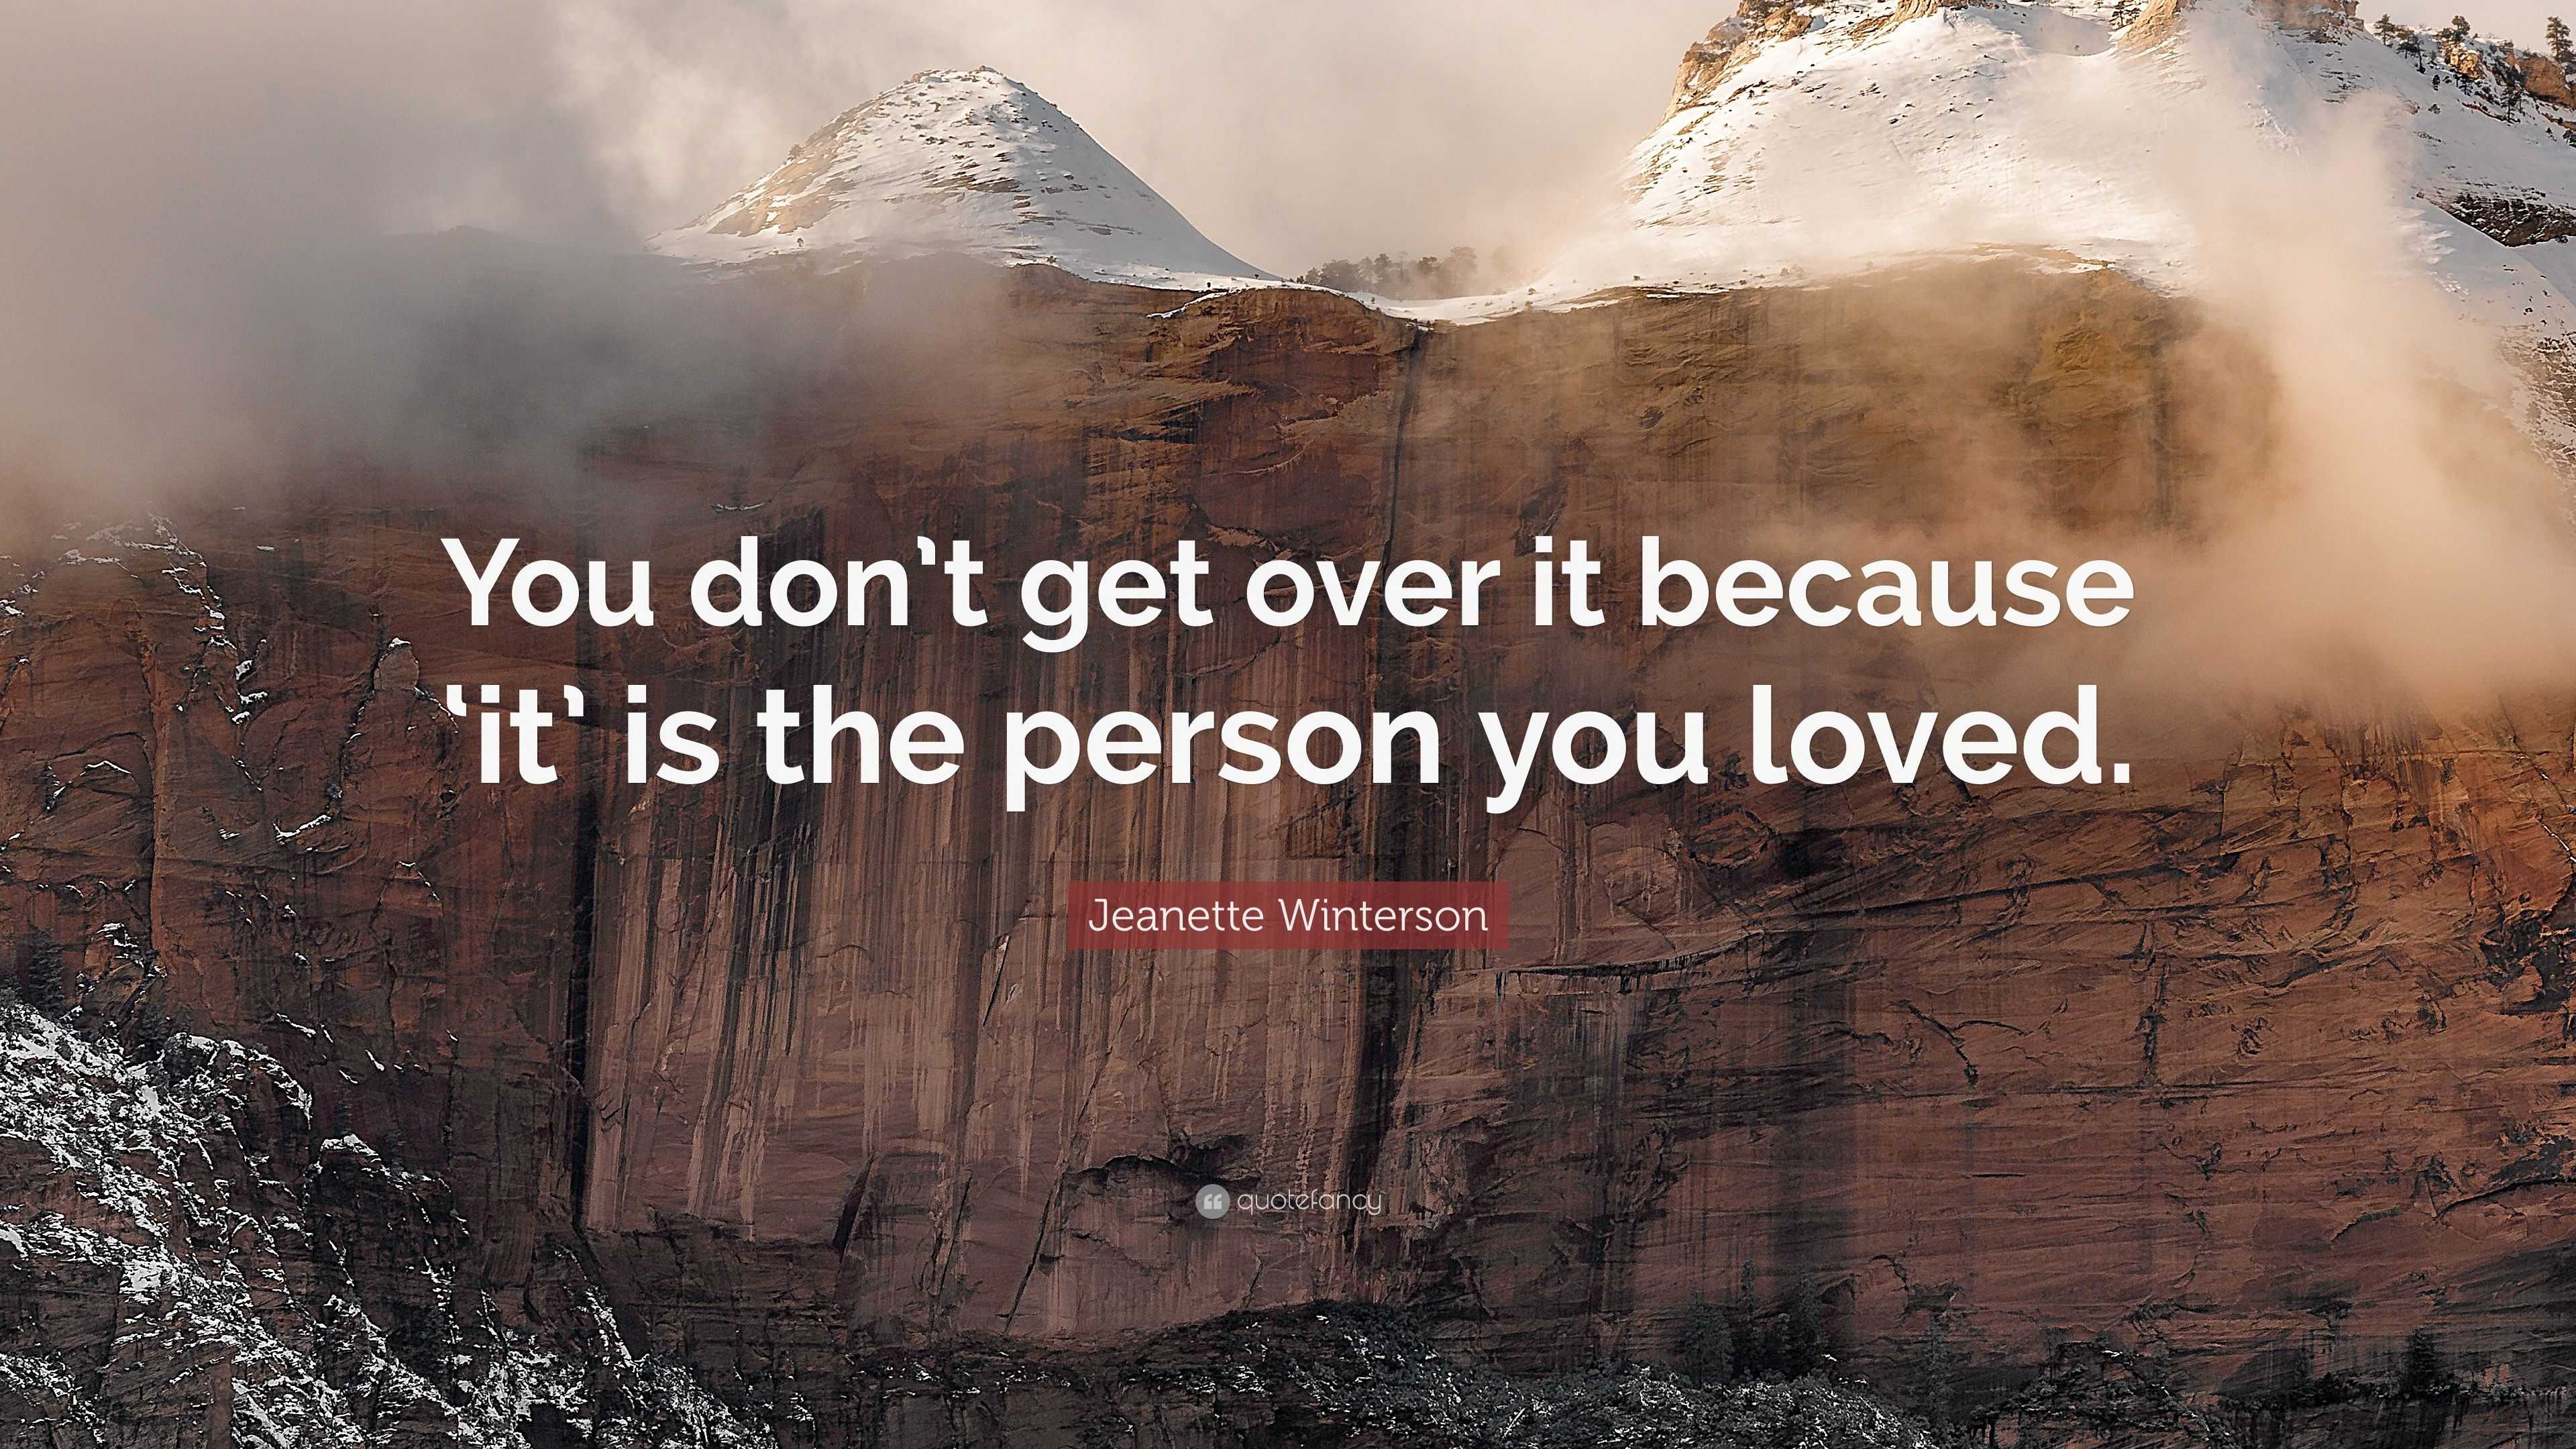 Jeanette Winterson Quote: “You don’t get over it because ‘it’ is the ...